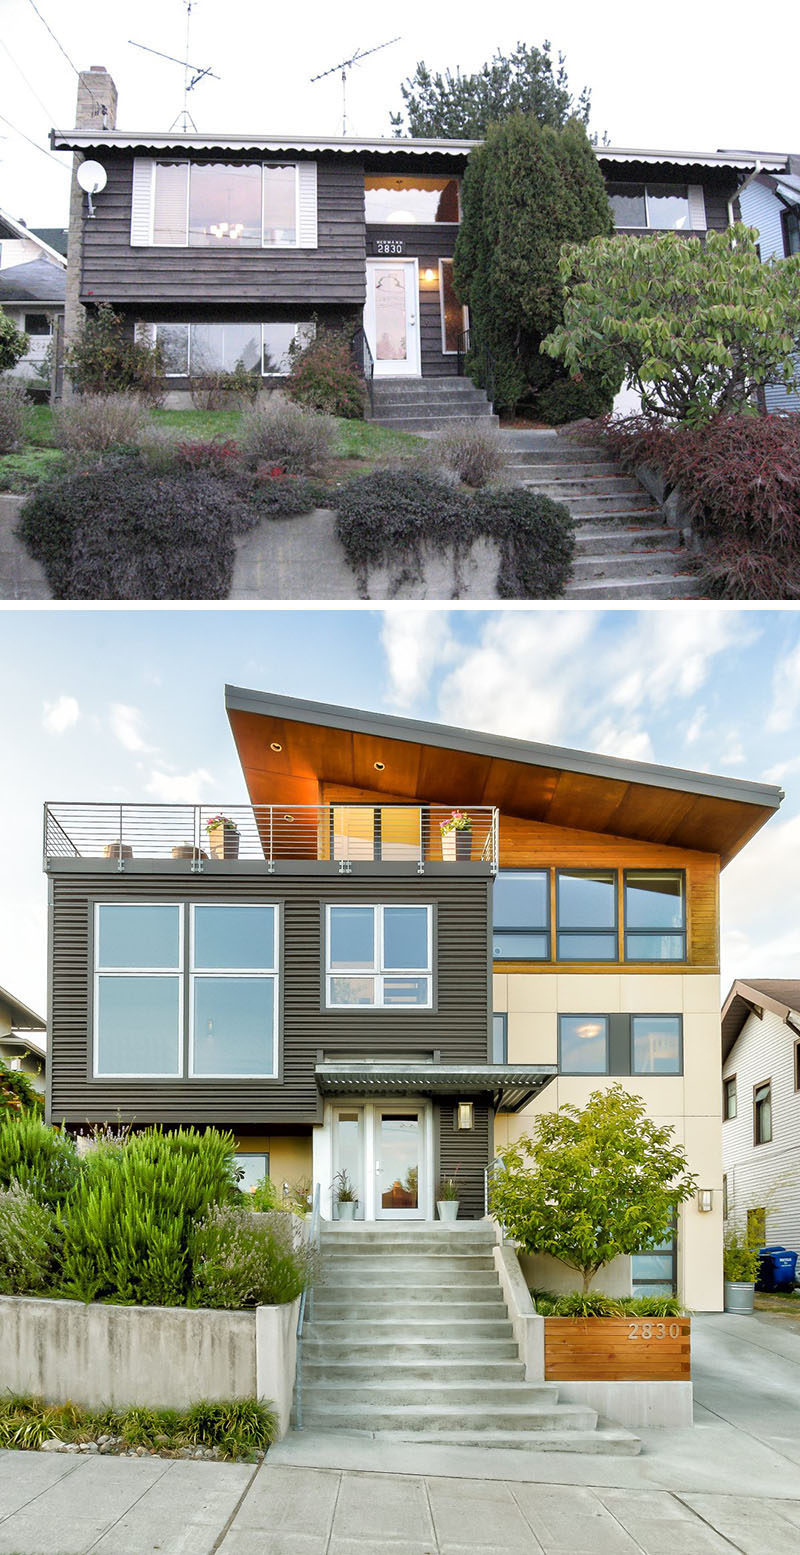 House Renovation Ideas - 17 Inspirational Before & After Projects // This split-level Seattle home was completely transformed with sleek metal siding, a wood extension, and a rooftop patio.